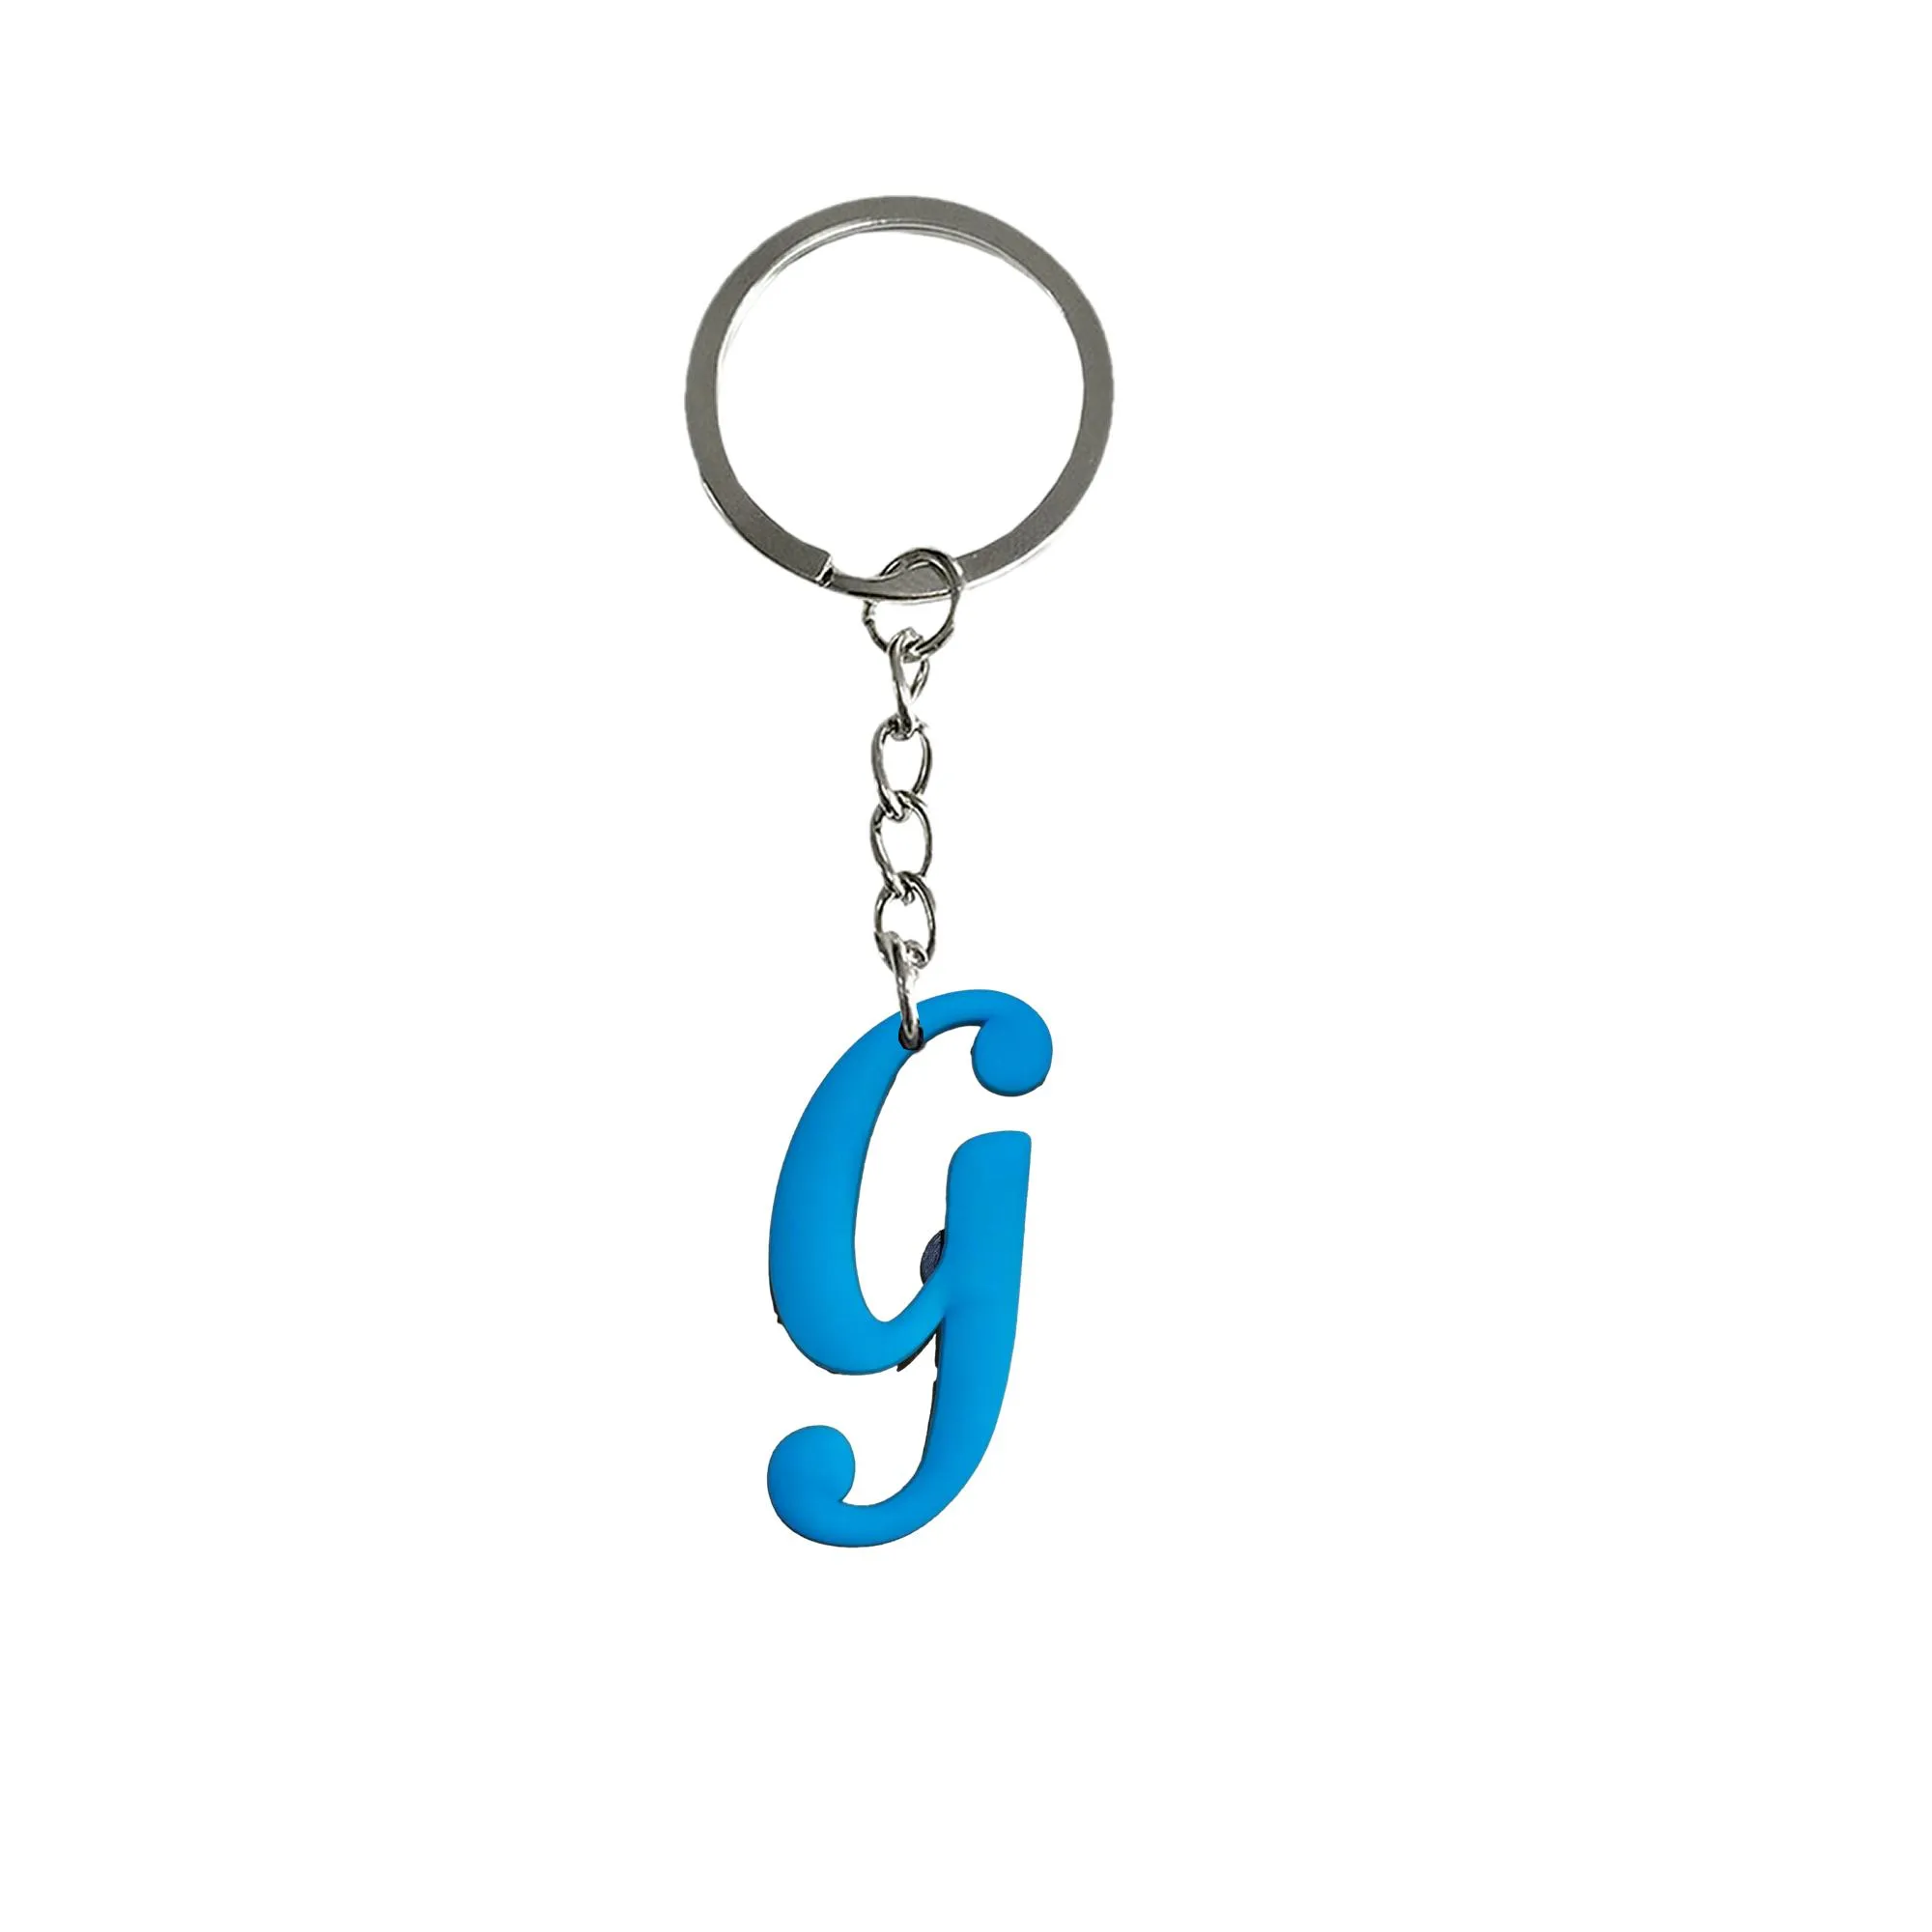 Charms Blue Large Letters Keychain Keychains For Backpack Kids Party Favors Keyring Suitable Schoolbag Women Key Ring Girls Pendant Ac Otq0N